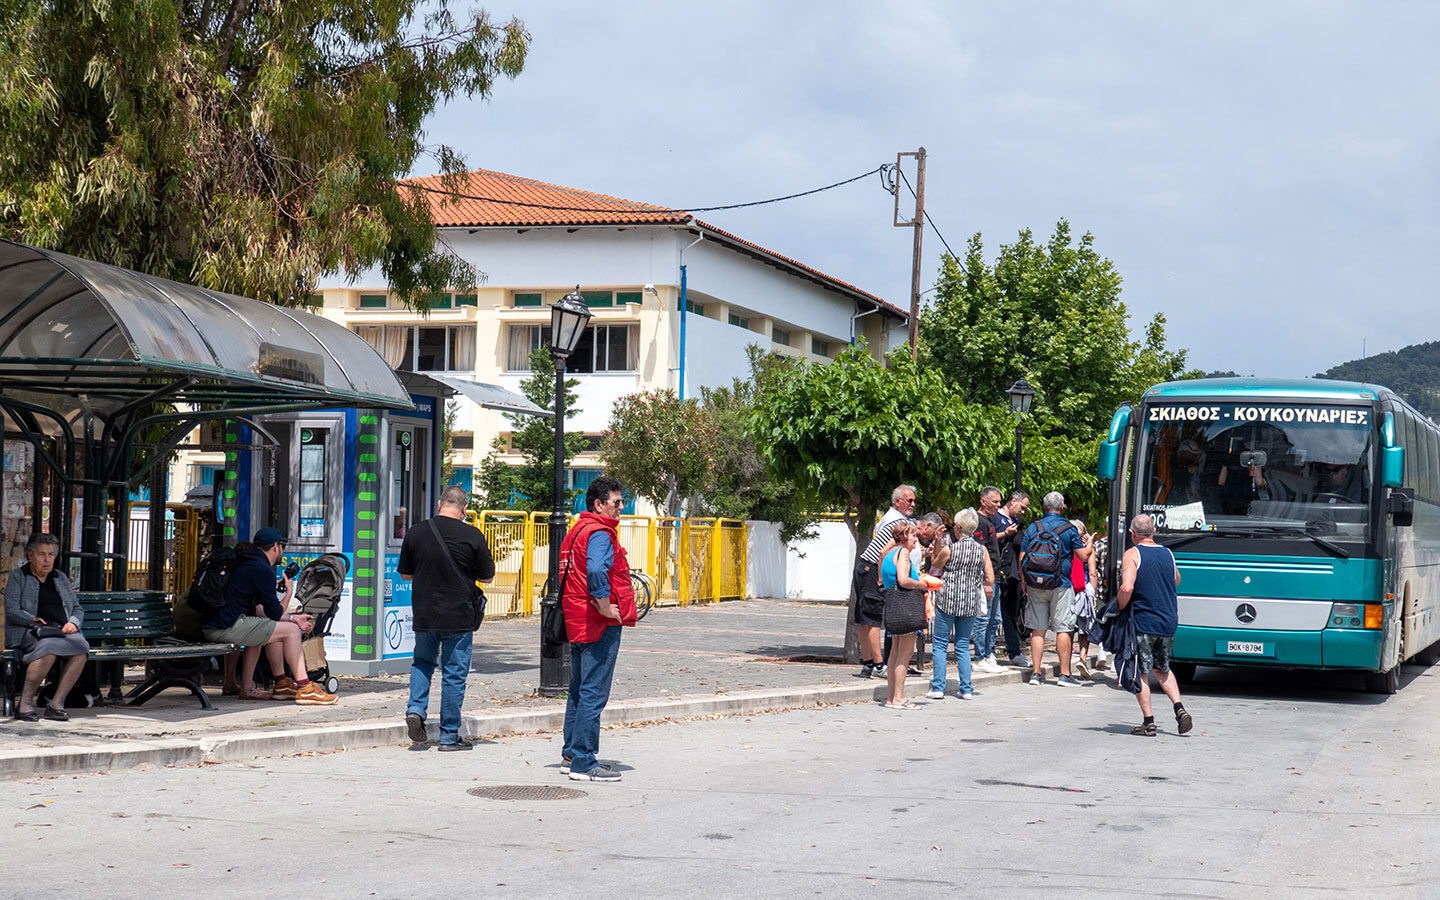 Bus stop 0 in Skiathos Town – where to catch the bus if you're visiting Skiathos without a car